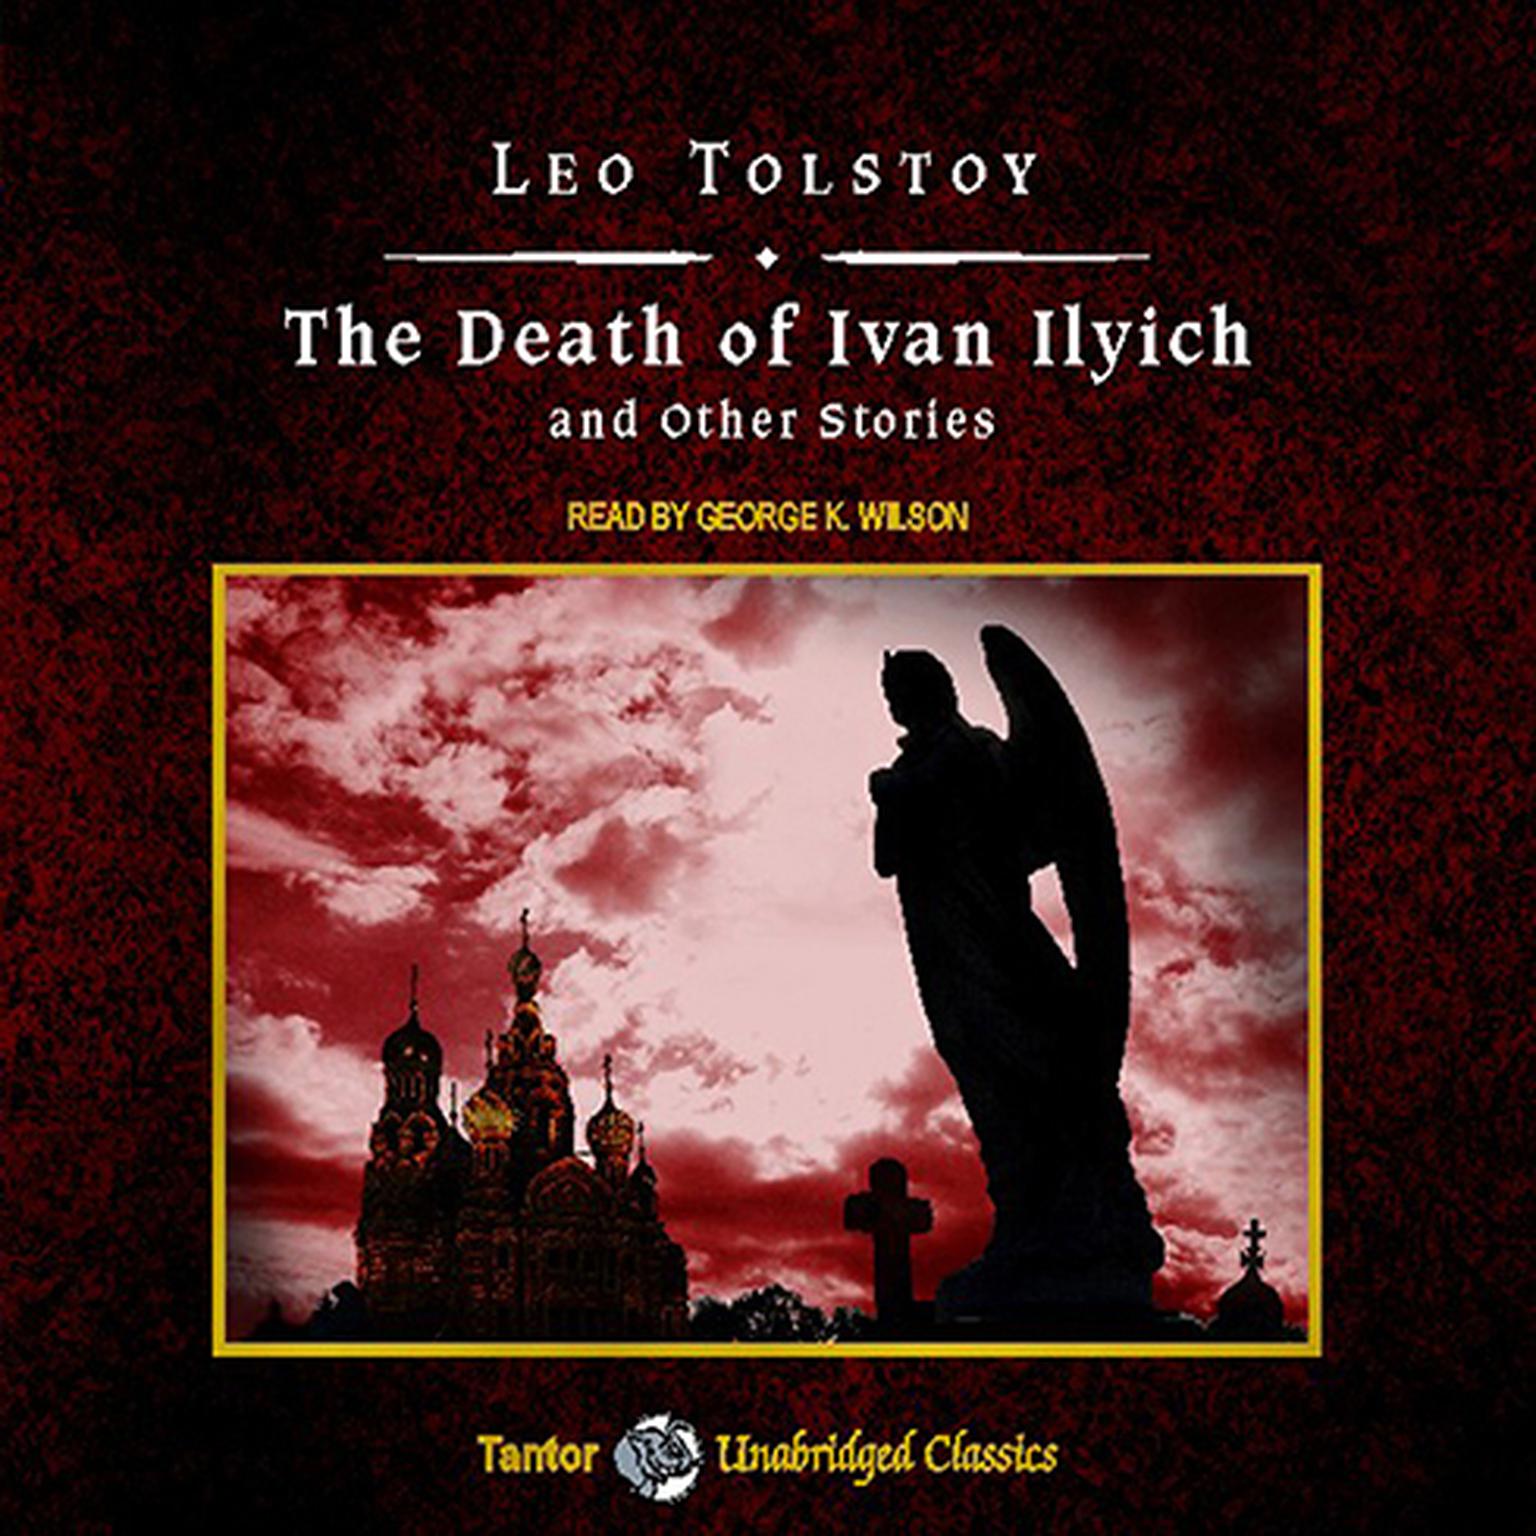 The Death of Ivan Ilyich and Other Stories, with eBook Audiobook, by Leo Tolstoy